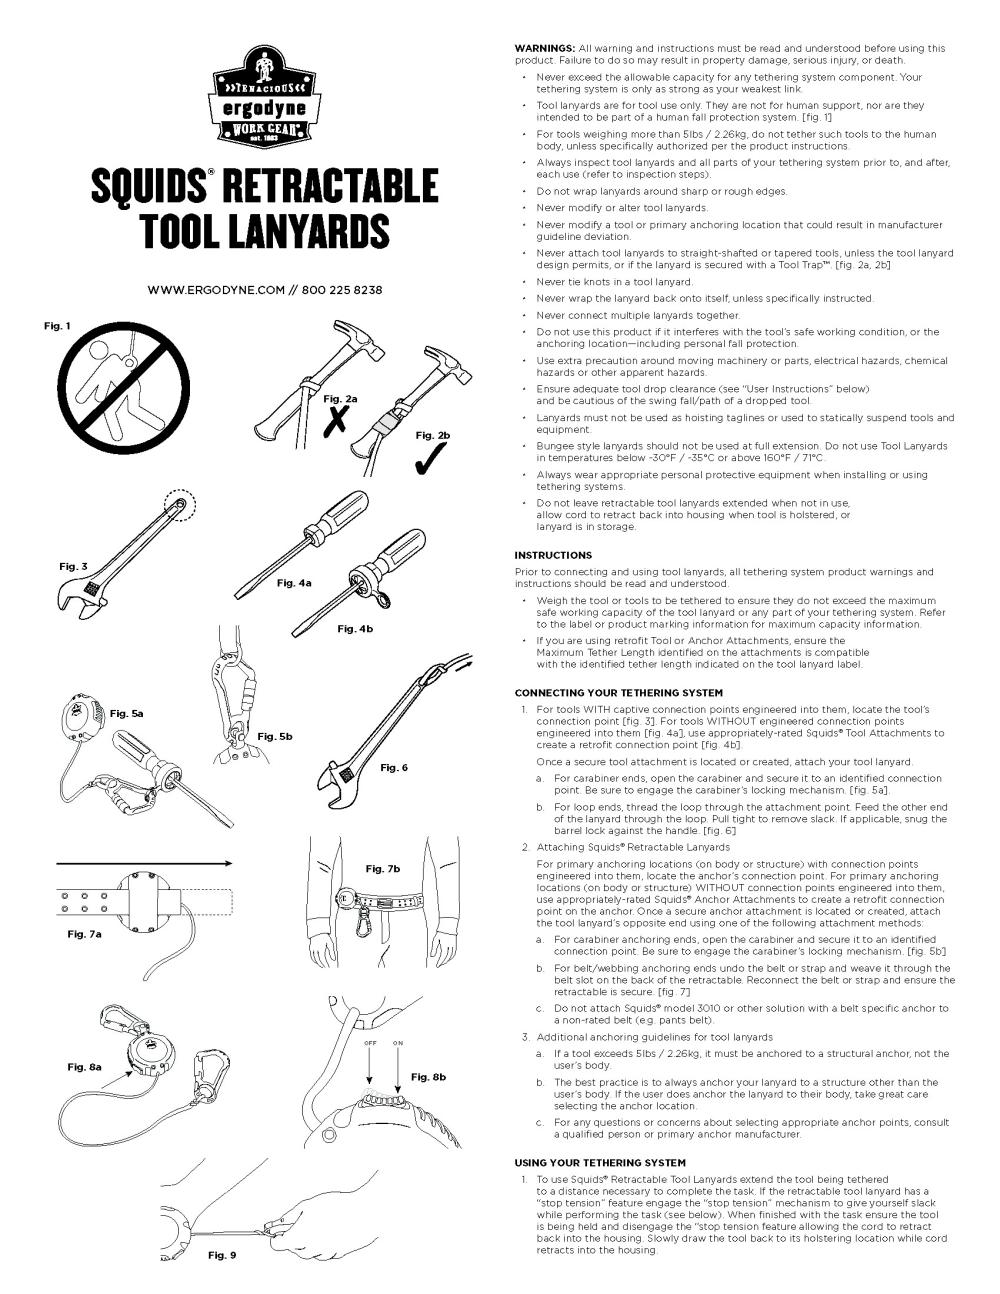 Squids lanyards instructions